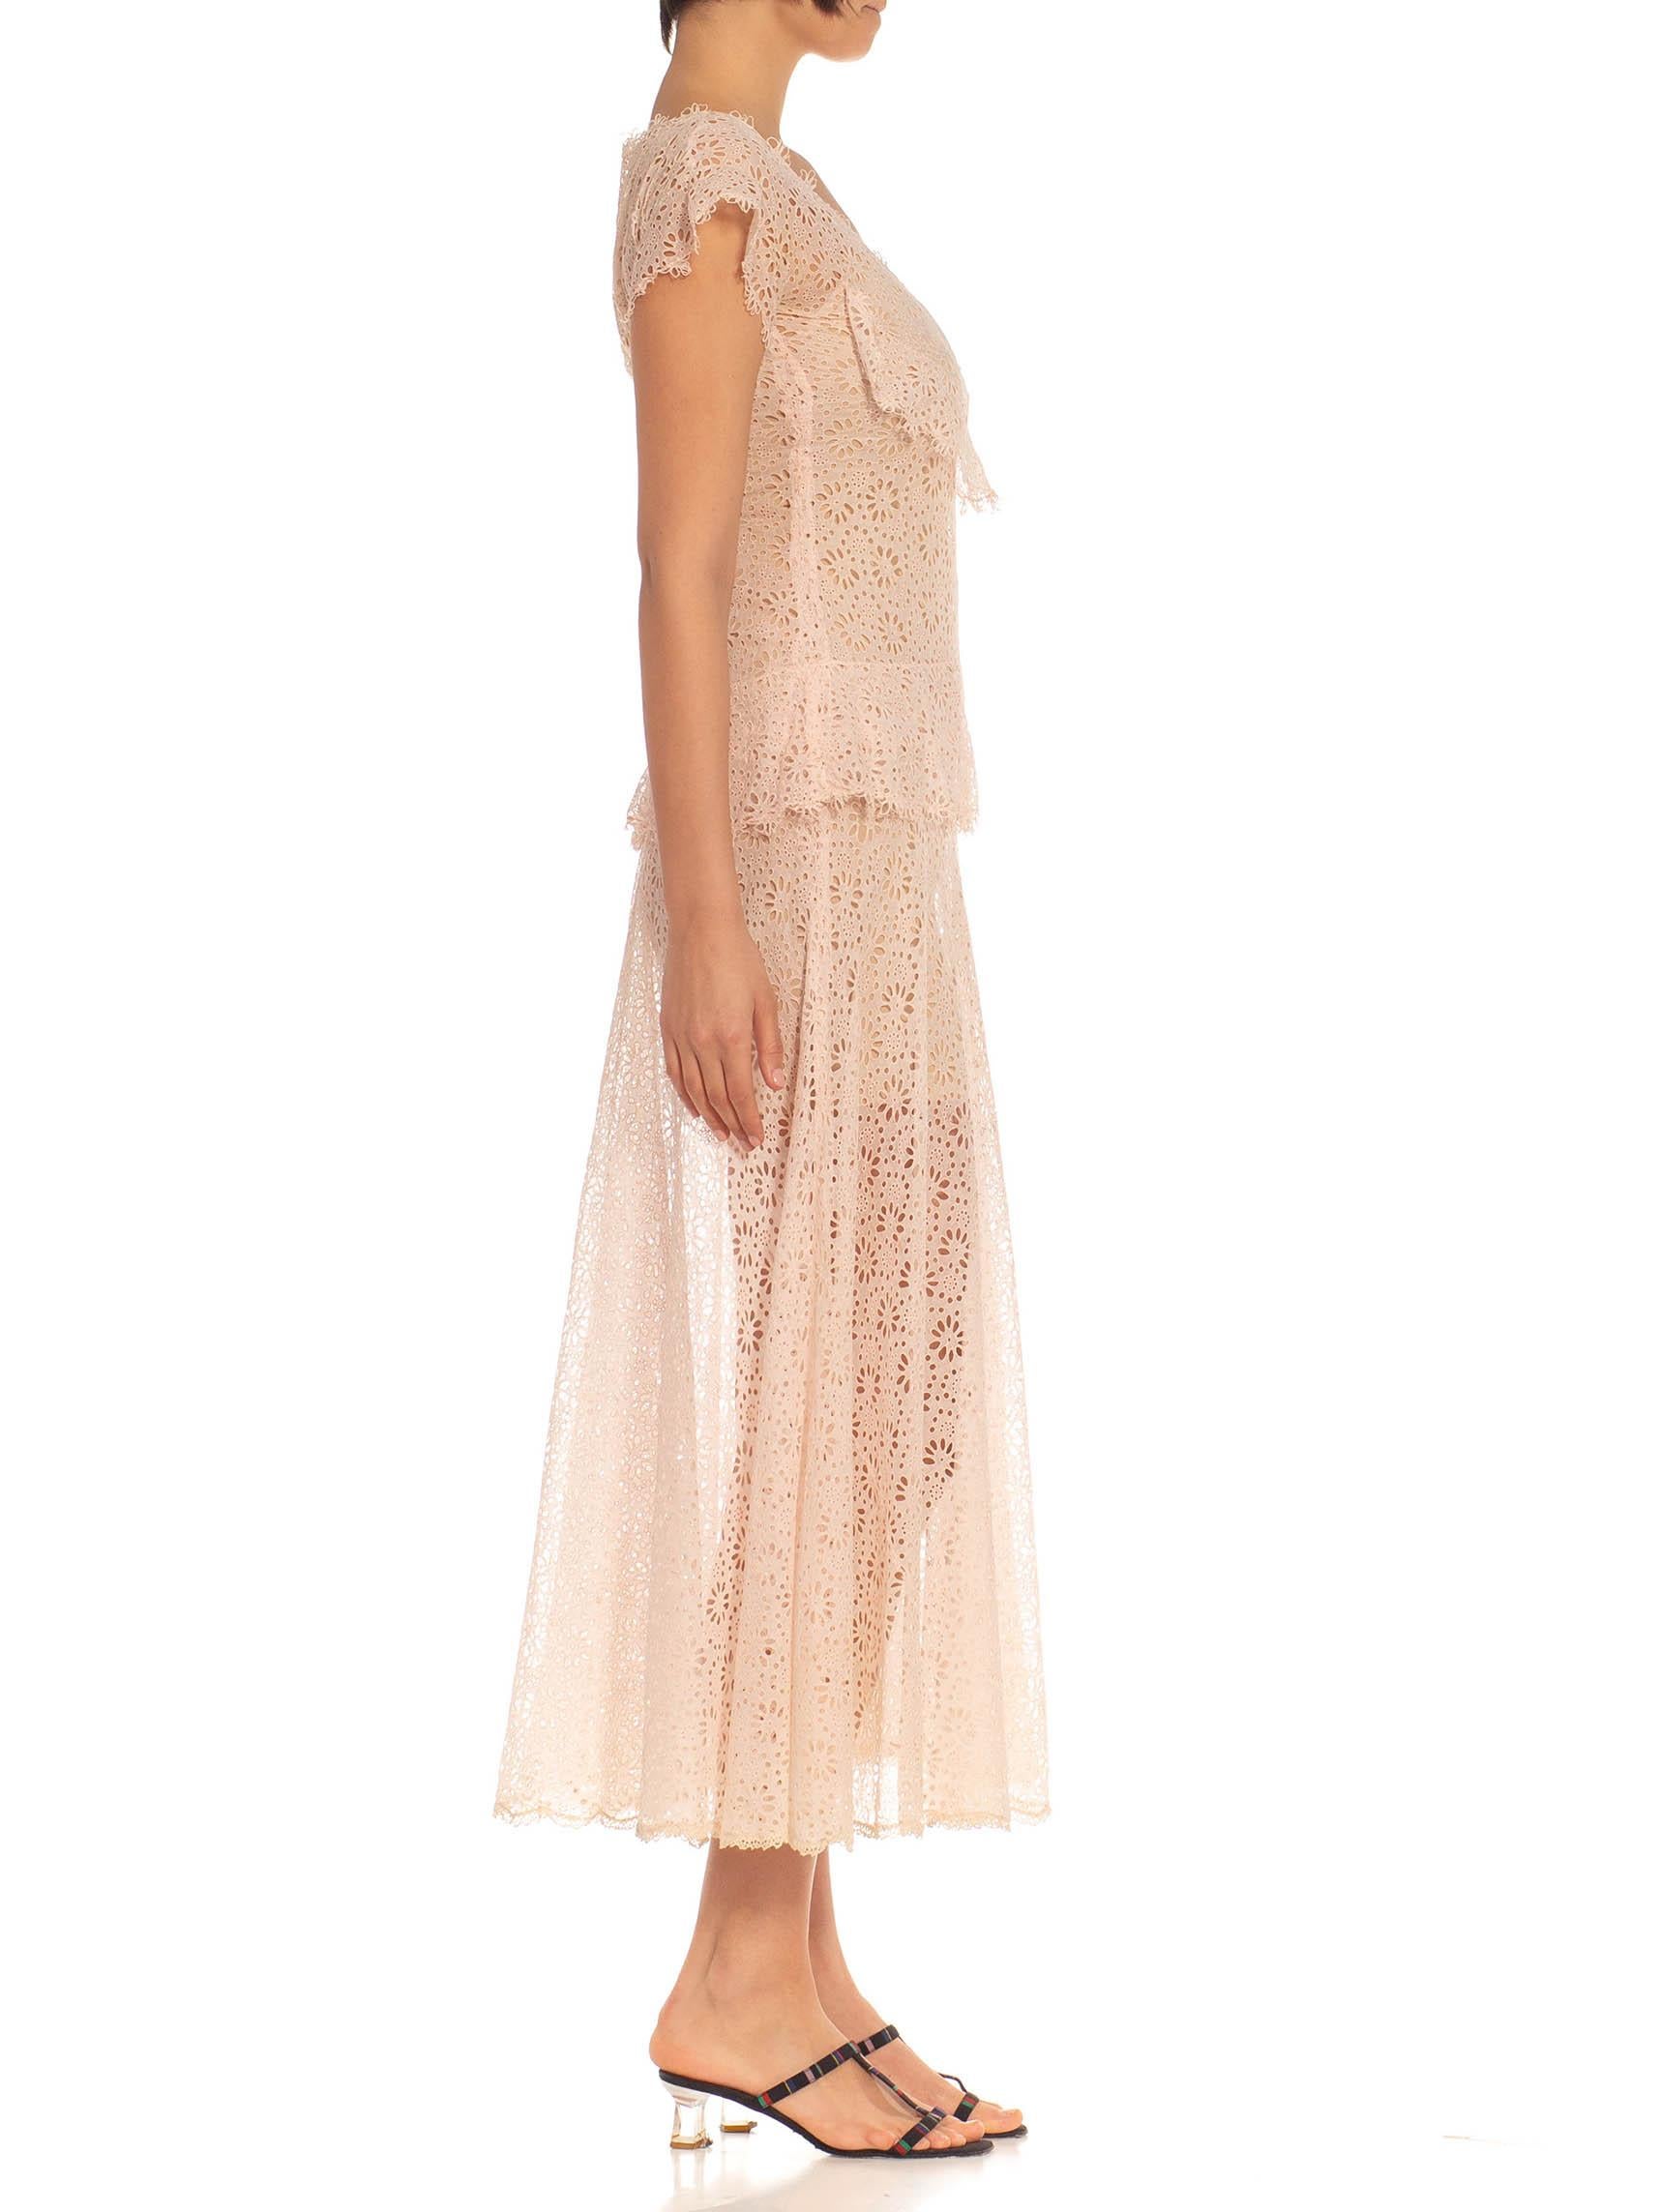 1940S Light Pink Cotton Eyelet Lace Dress In Excellent Condition For Sale In New York, NY